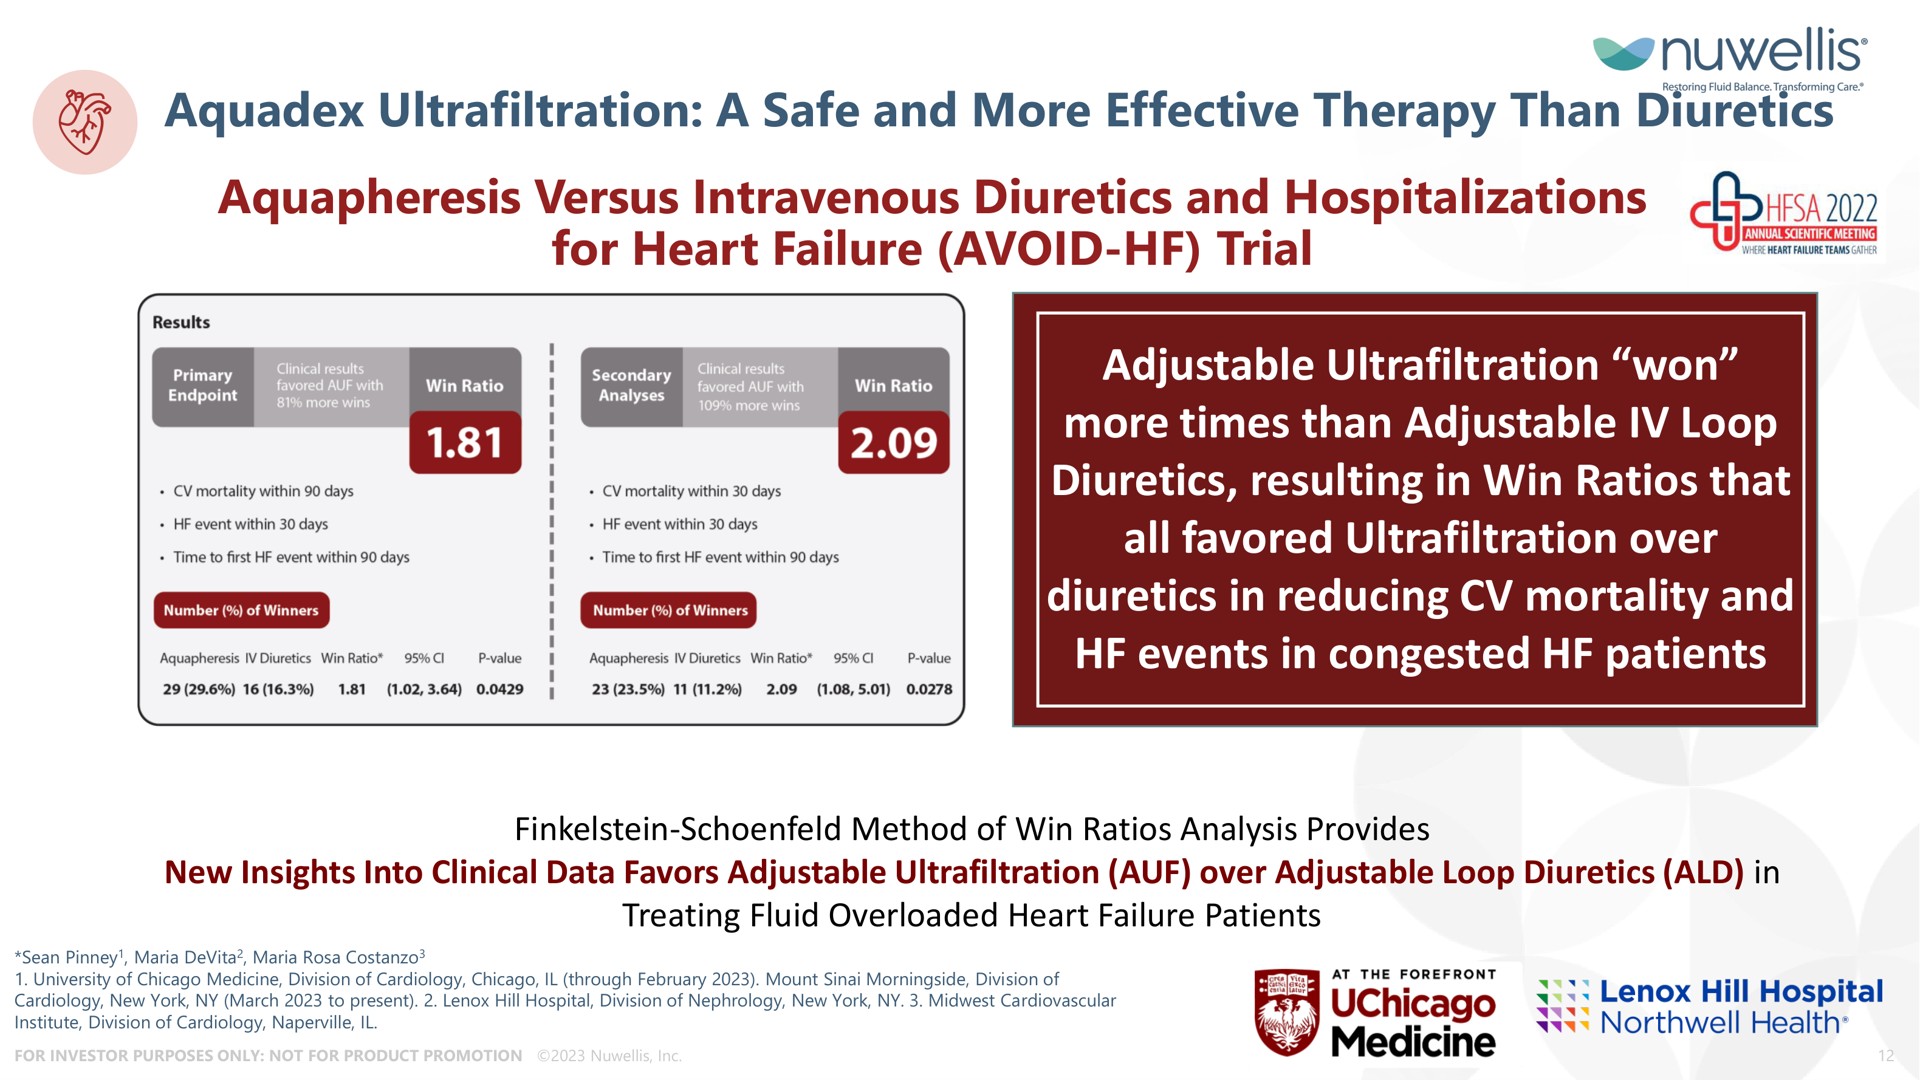 ultrafiltration a safe and more effective therapy than diuretics versus intravenous diuretics and hospitalizations for heart failure avoid trial adjustable ultrafiltration won more times than adjustable loop diuretics resulting in win ratios that all favored ultrafiltration over diuretics in reducing mortality and events in congested patients venue am dale pale | Nuwellis